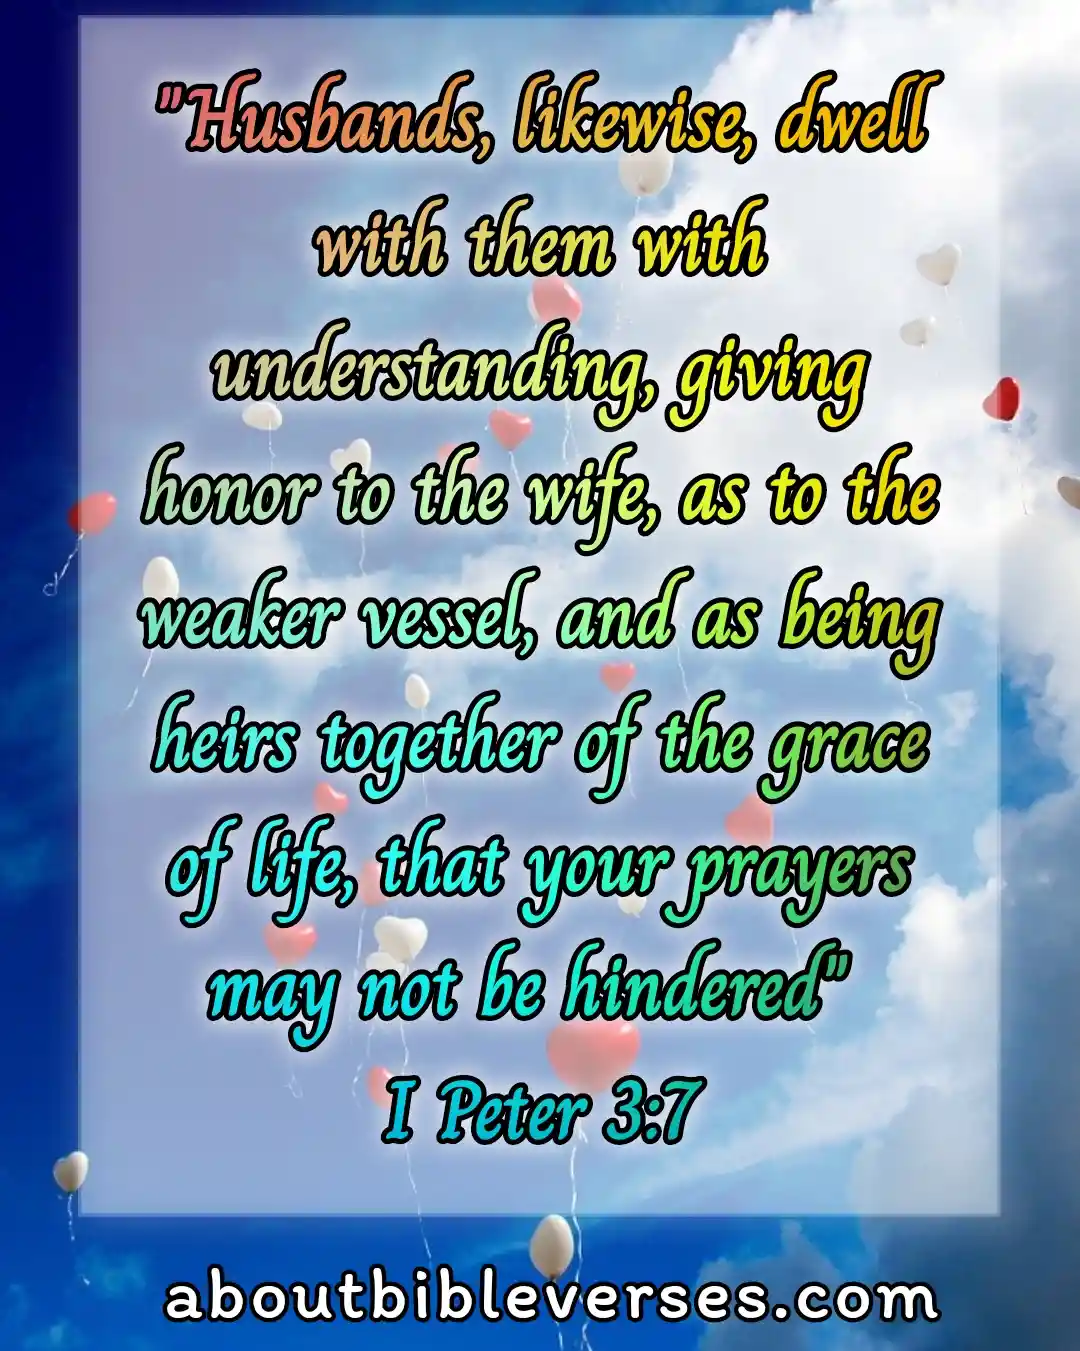 Bible Verses About Appreciating Your Husband (1 Peter 3:7)